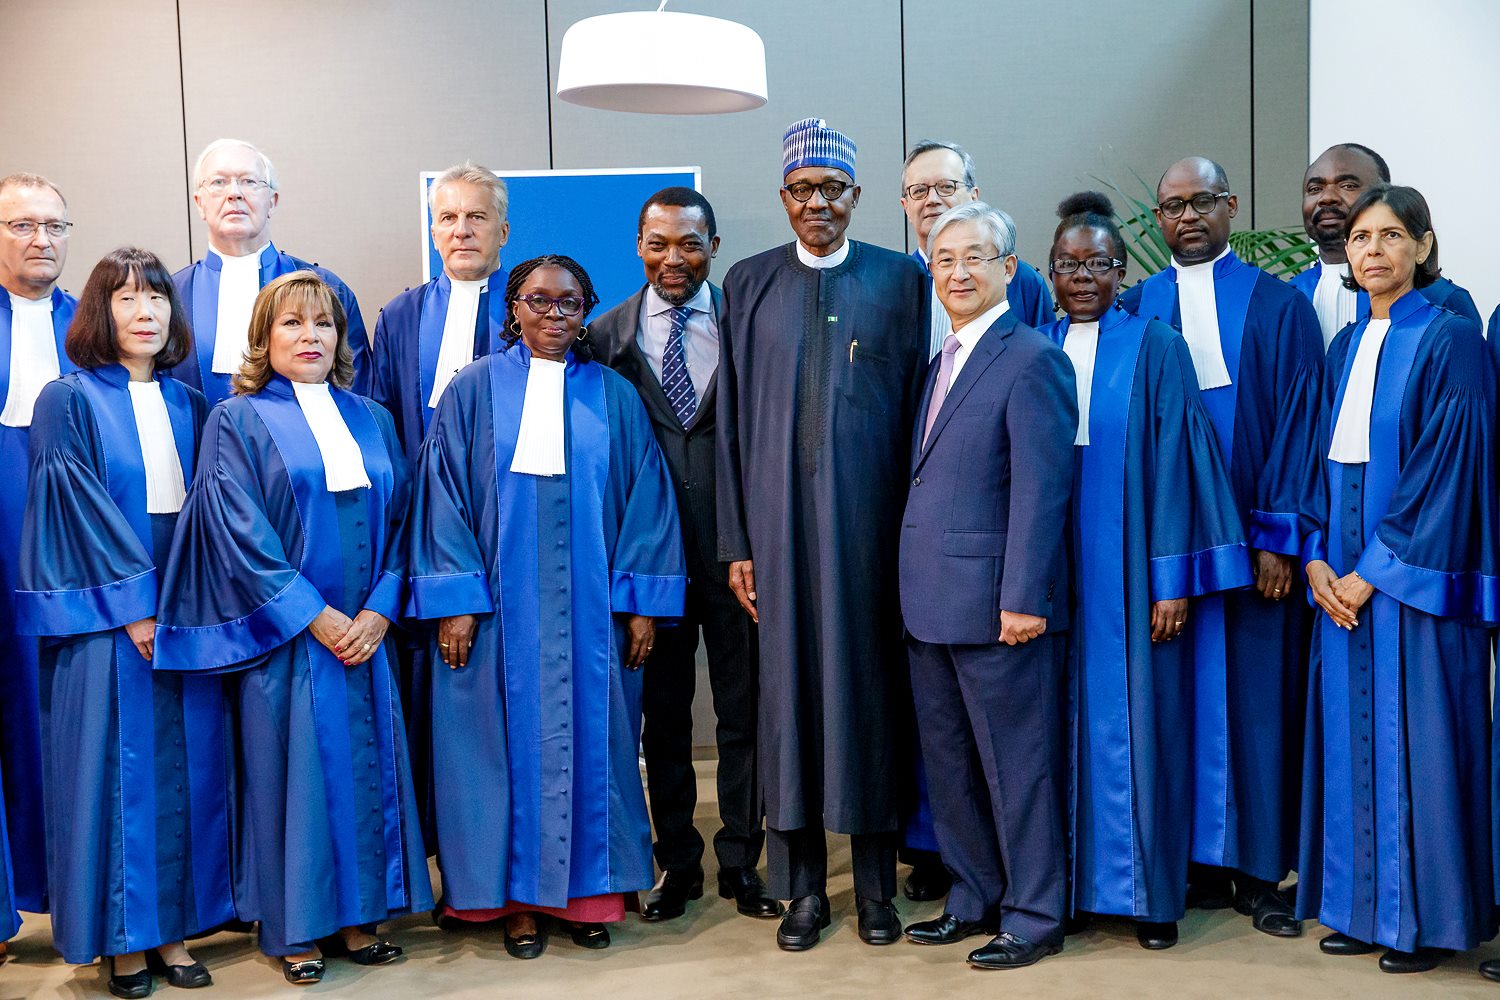 President Buhari in a group photo with Judges of the Criminal Court ahead of his Keynote address at the 20th Anniversary of the International Criminal Court (ICC) at the Hague, Netherlands on 17th July 2018